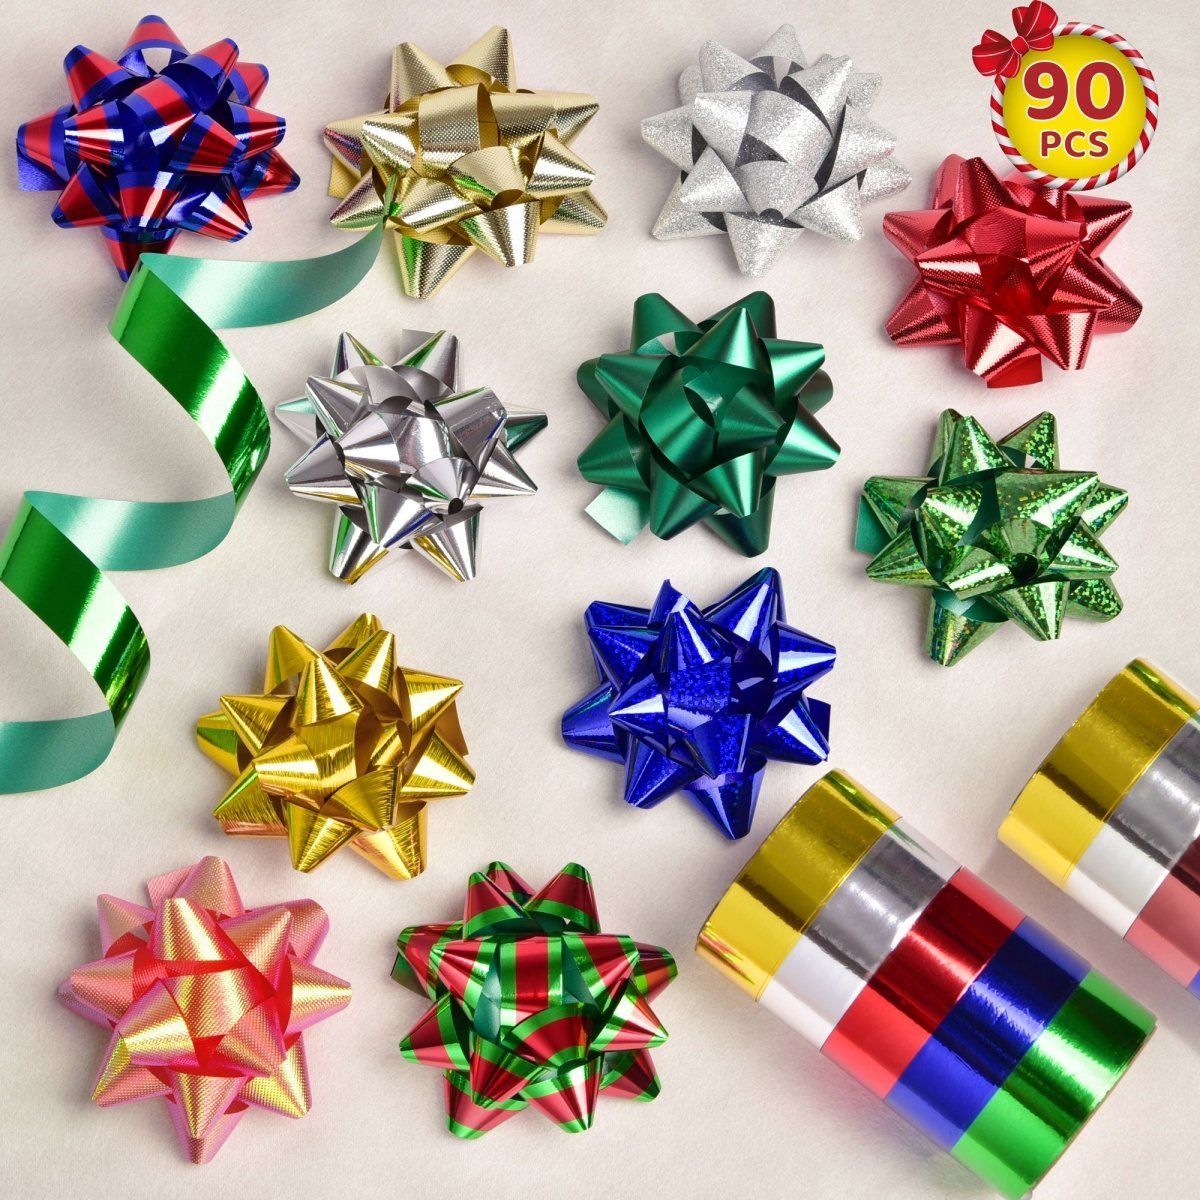 Christmas Bows for Gift Wrapping, 12PCS Wrap Pull Indonesia